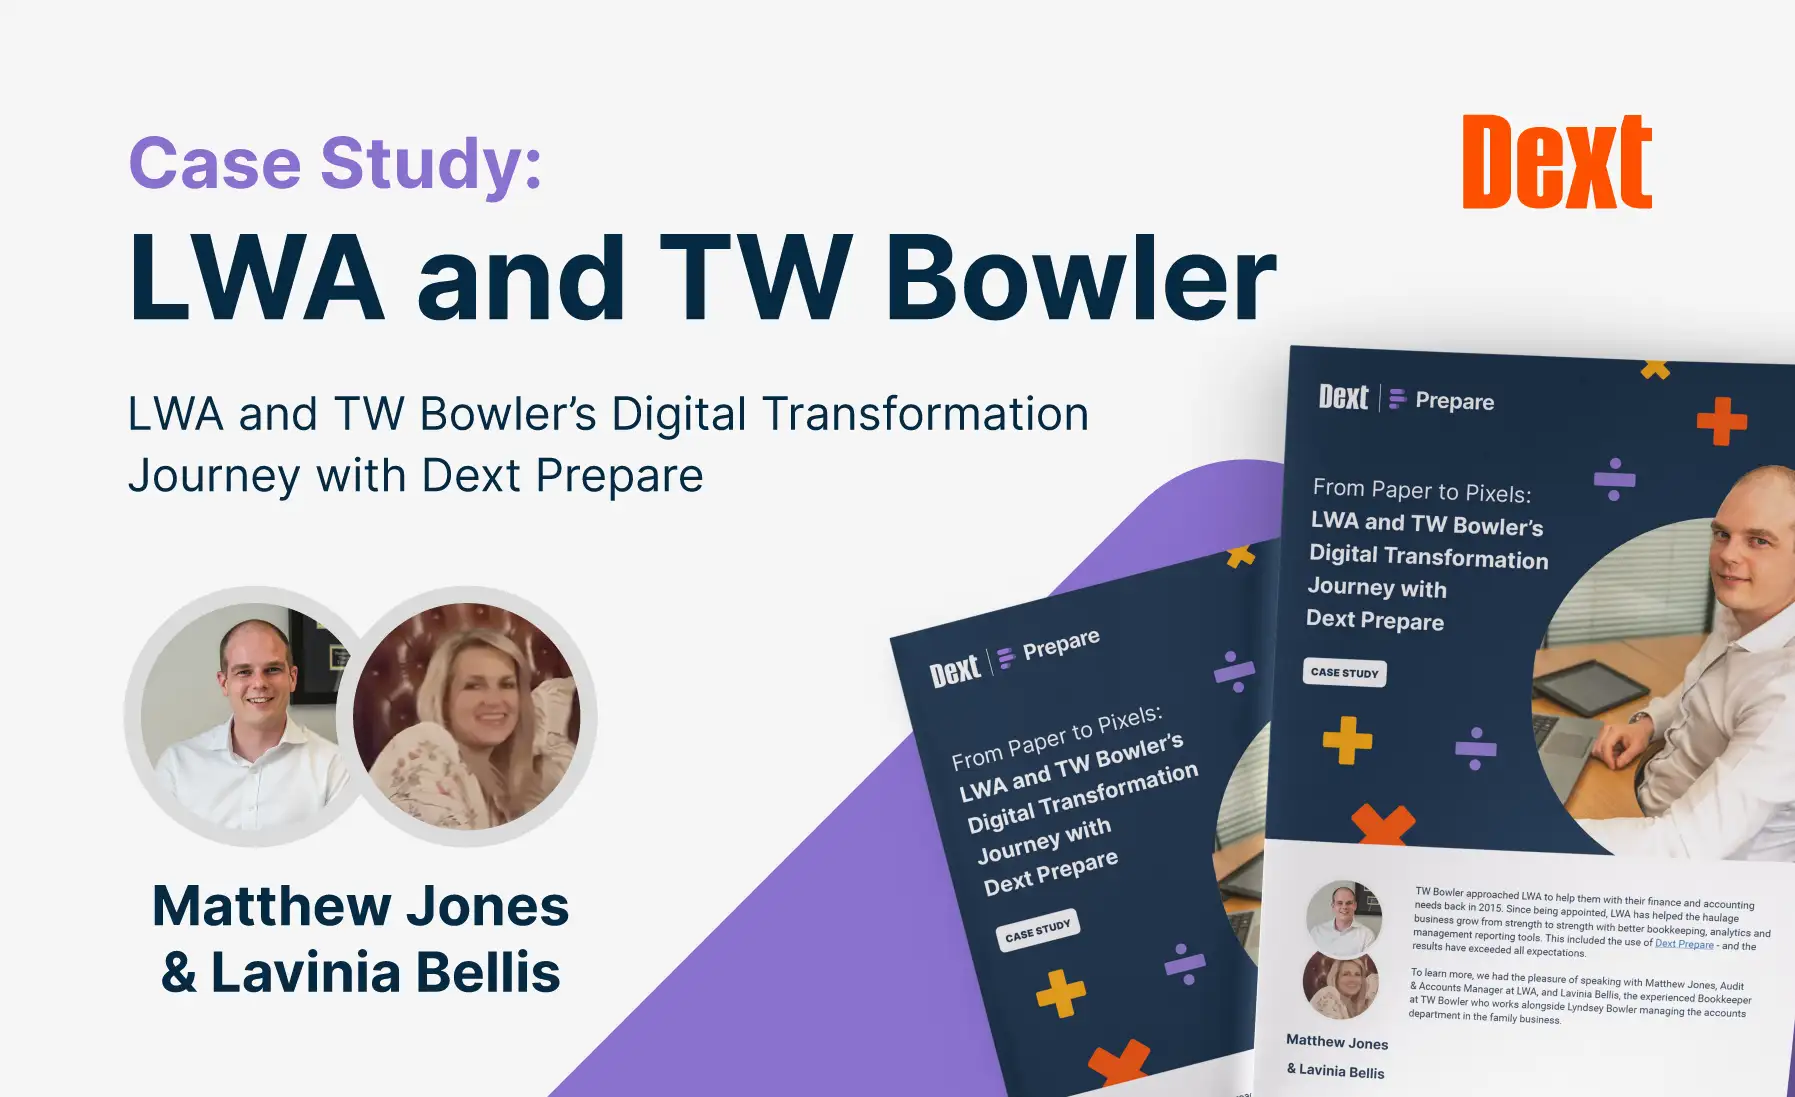 From Paper to Pixels: LWA and TW Bowler’s Digital Transformation Journey with Dext Prepare logo